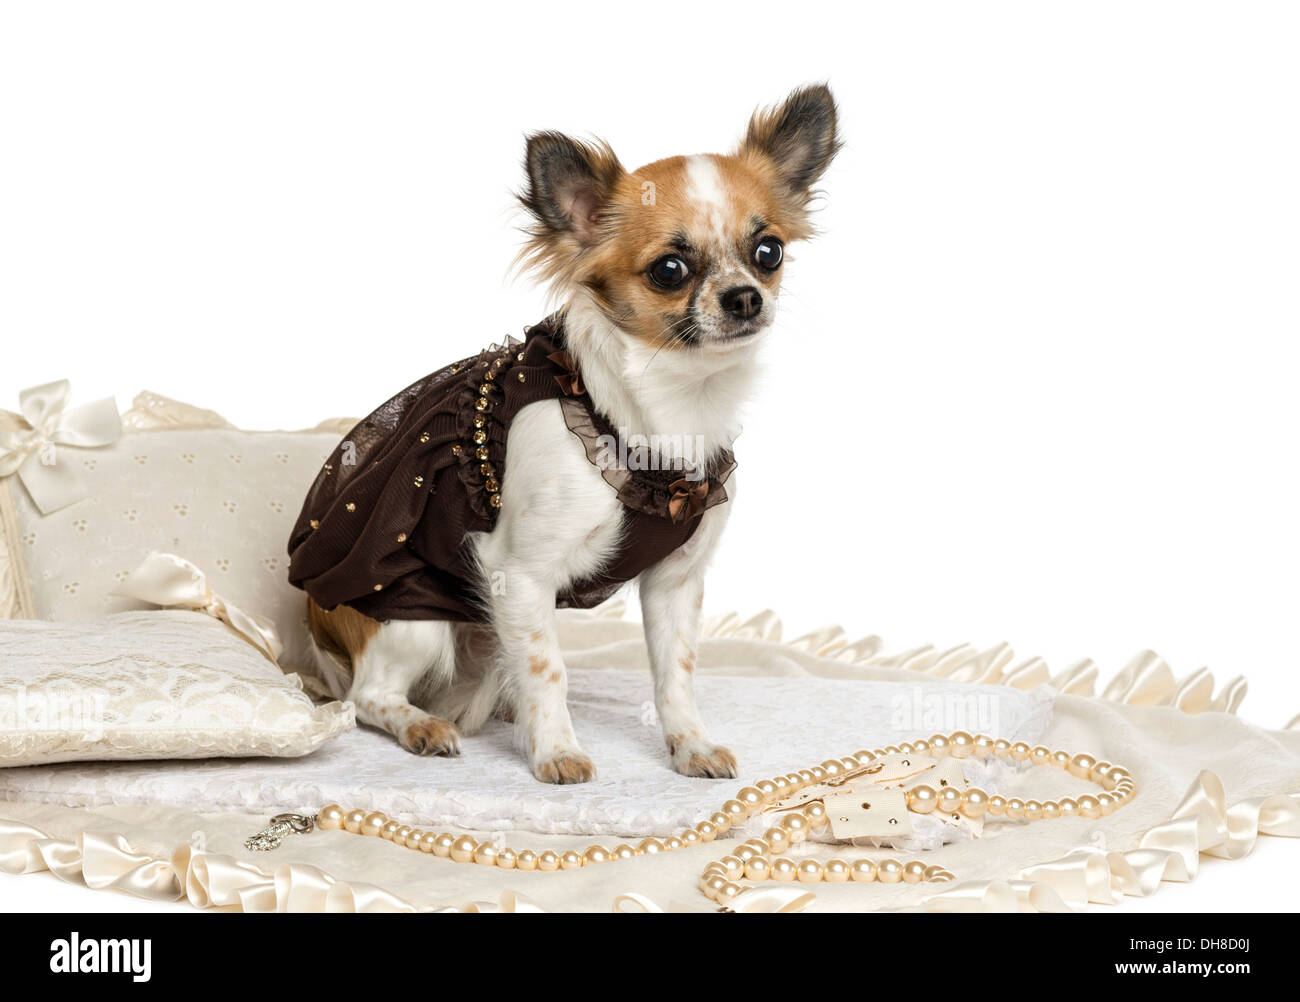 Dressed-up Chihuahua sitting on rug against white background Stock Photo